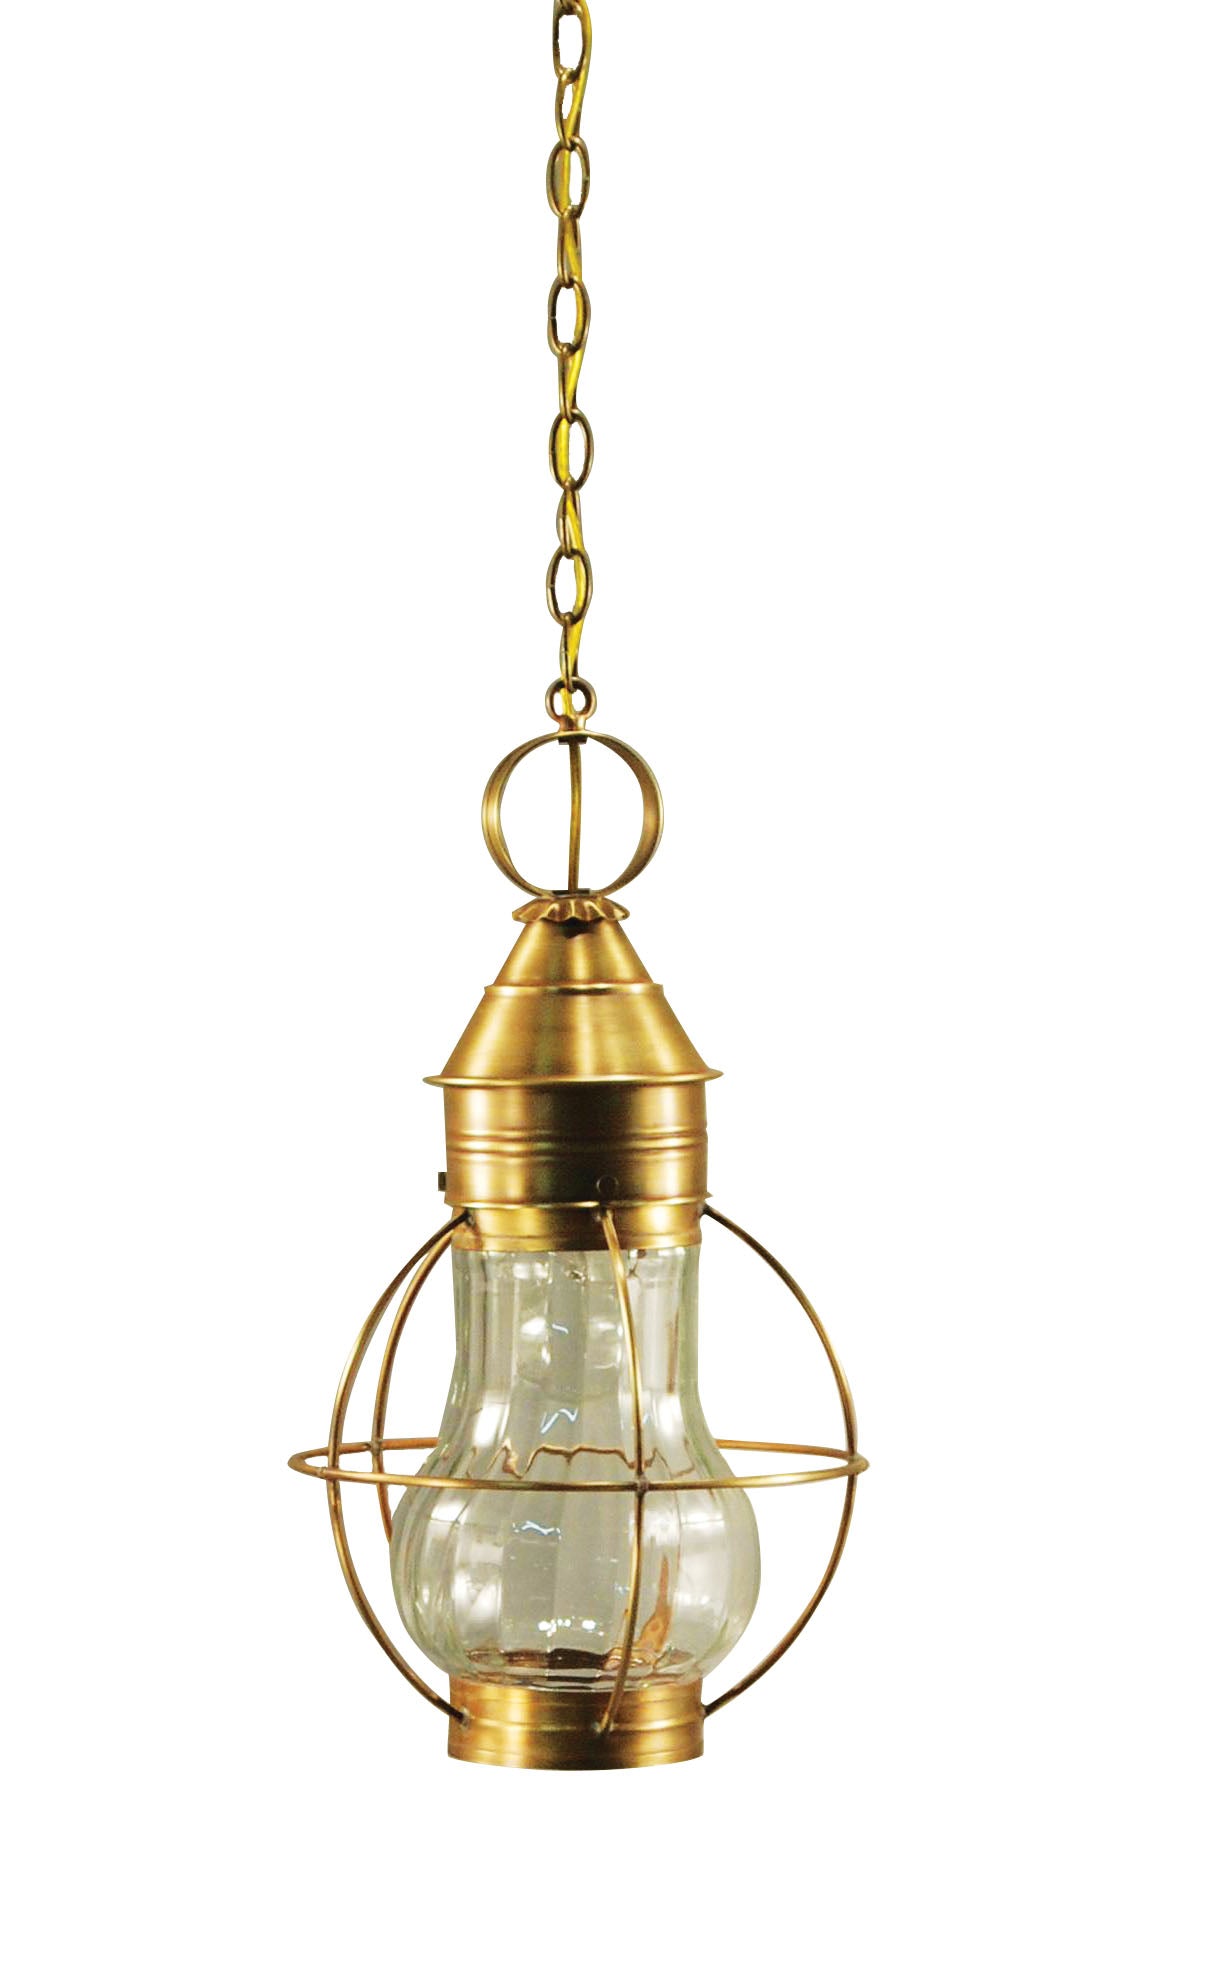 Bosc Caged Pear Outdoor Hanging Lantern 2732